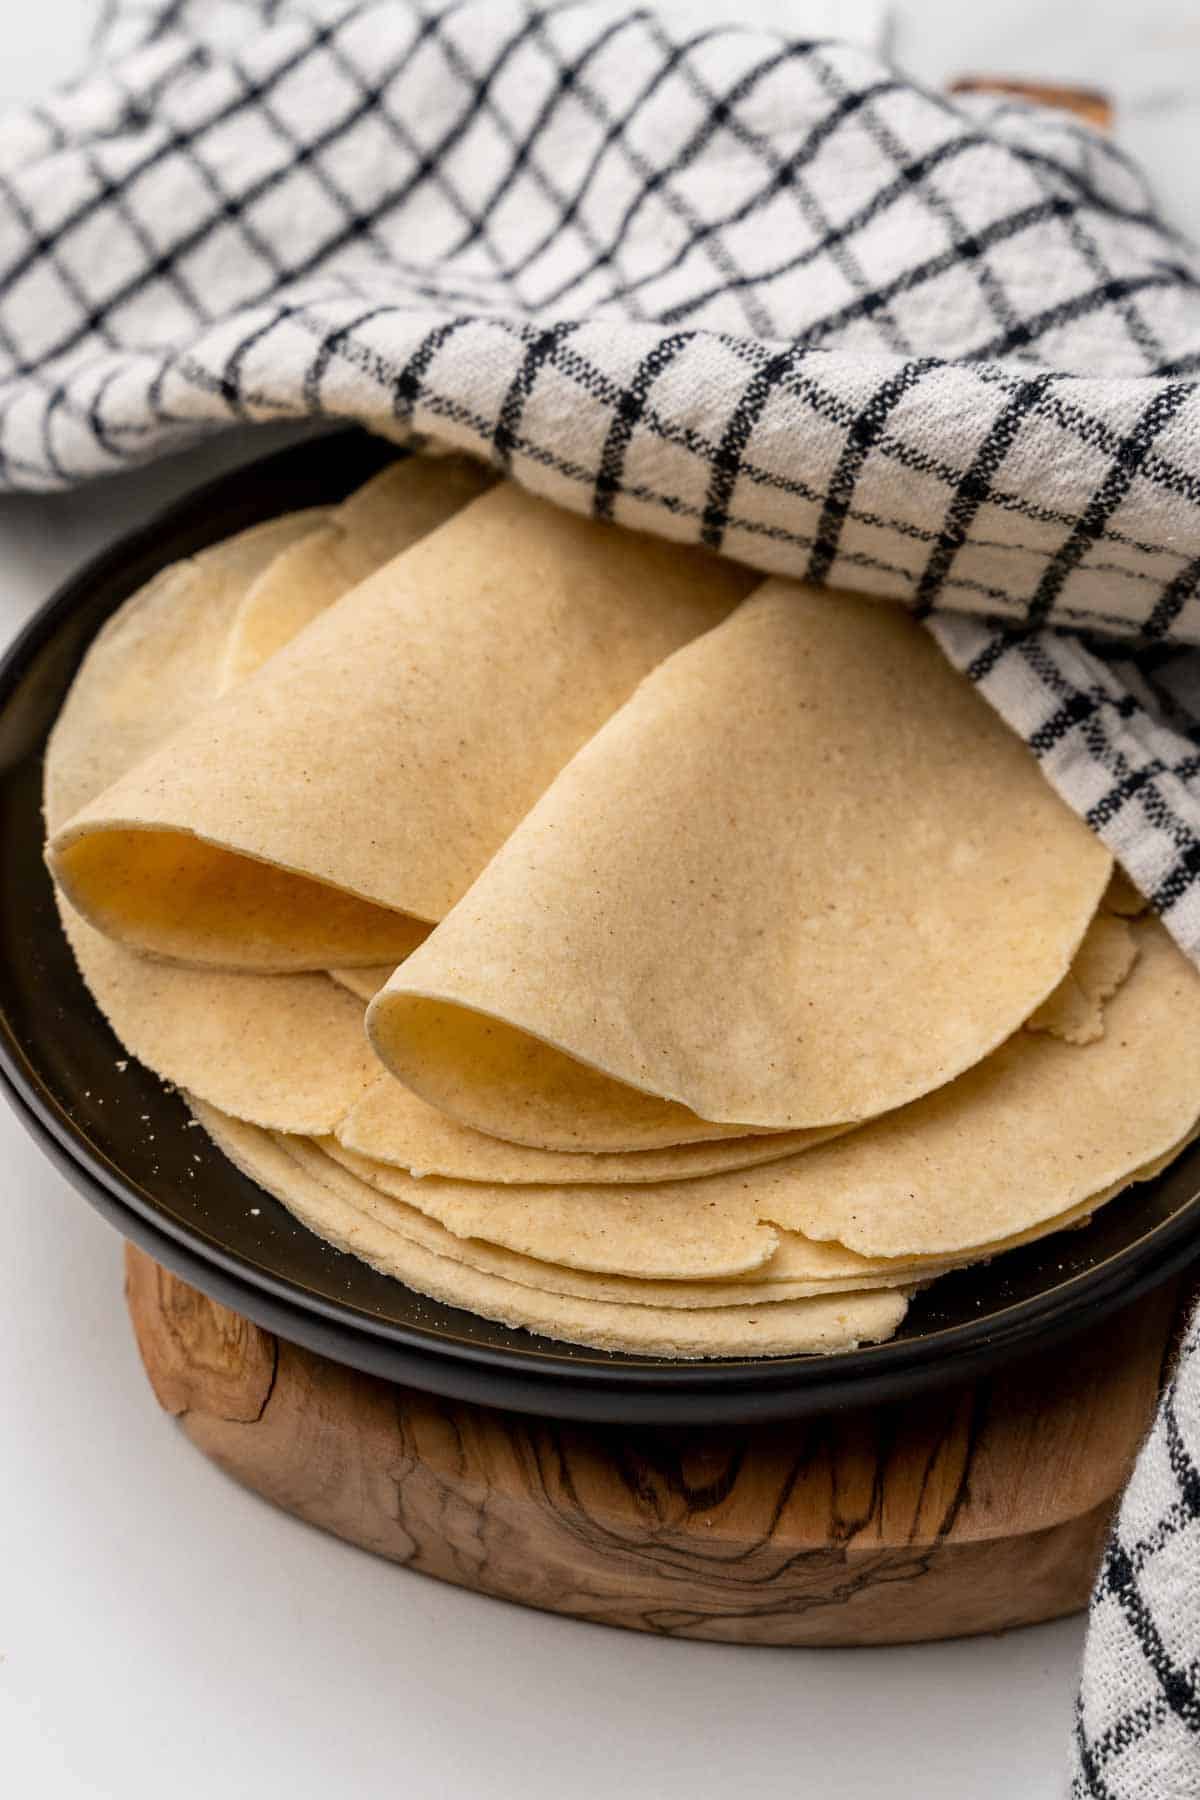 Plate of homemade tortillas partially covered with a dishtowel